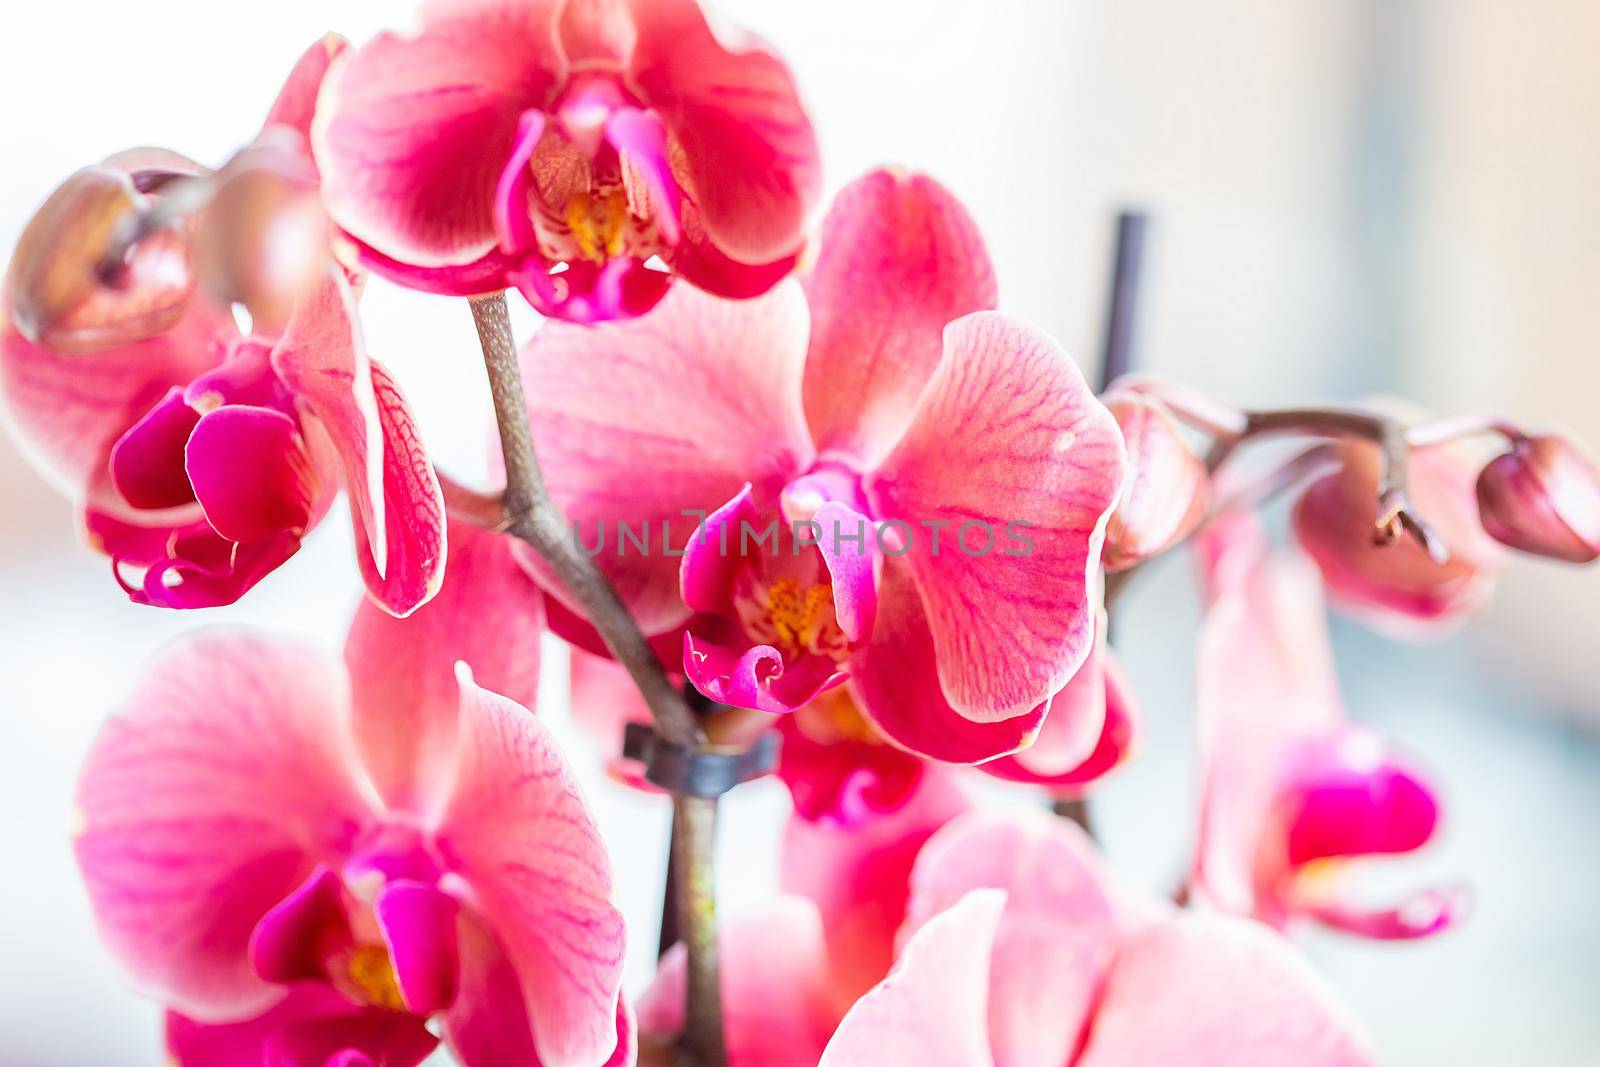 Pink Phalaenopsis orchid flowers are photographed in front of a window in natural light